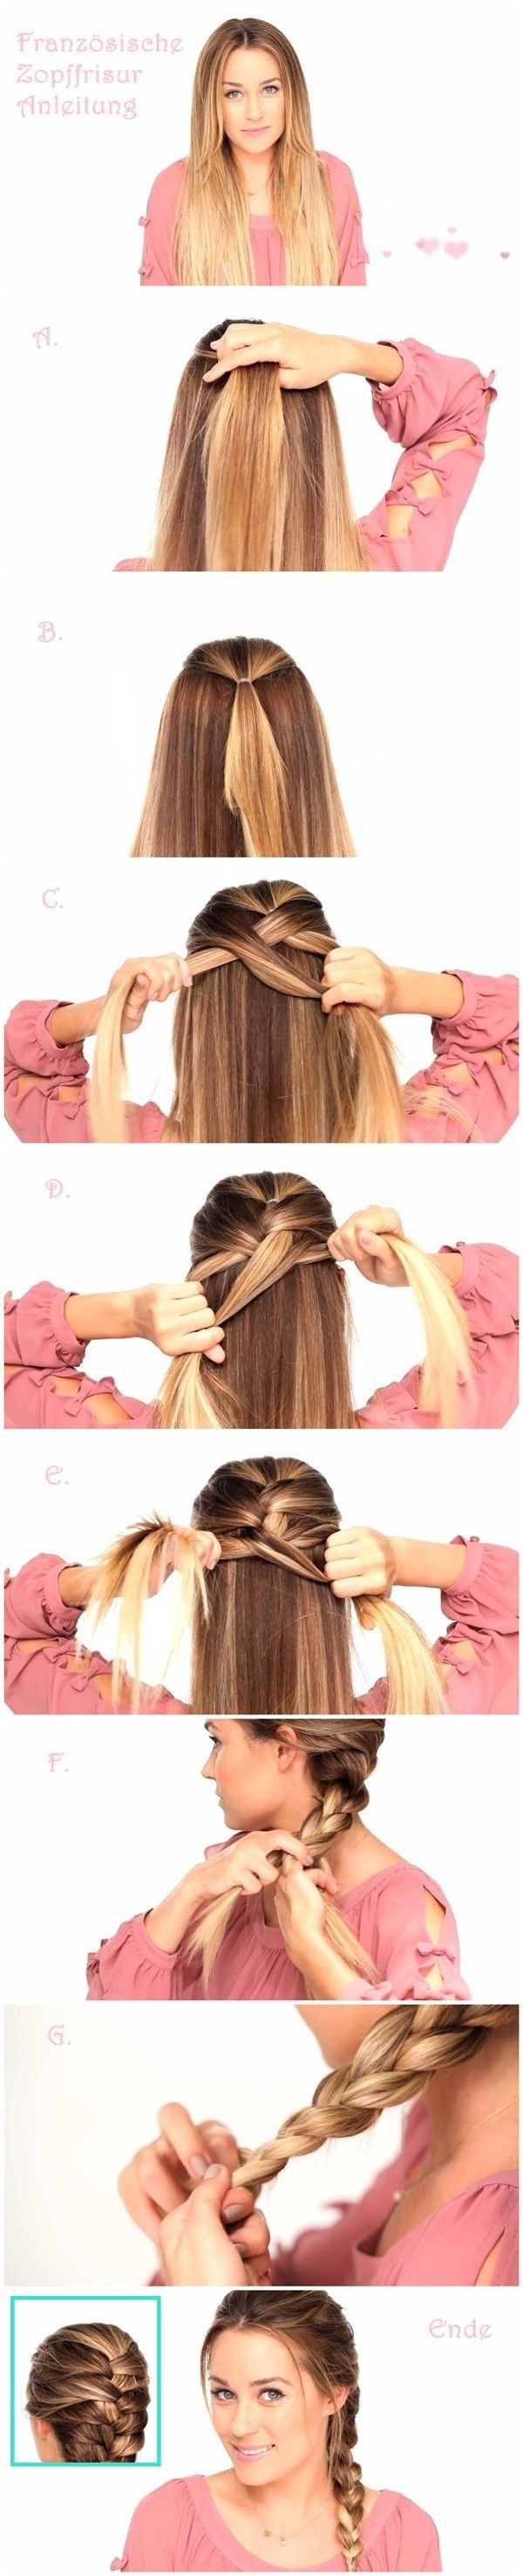 Easy French Braid Hairstyle Tutorial